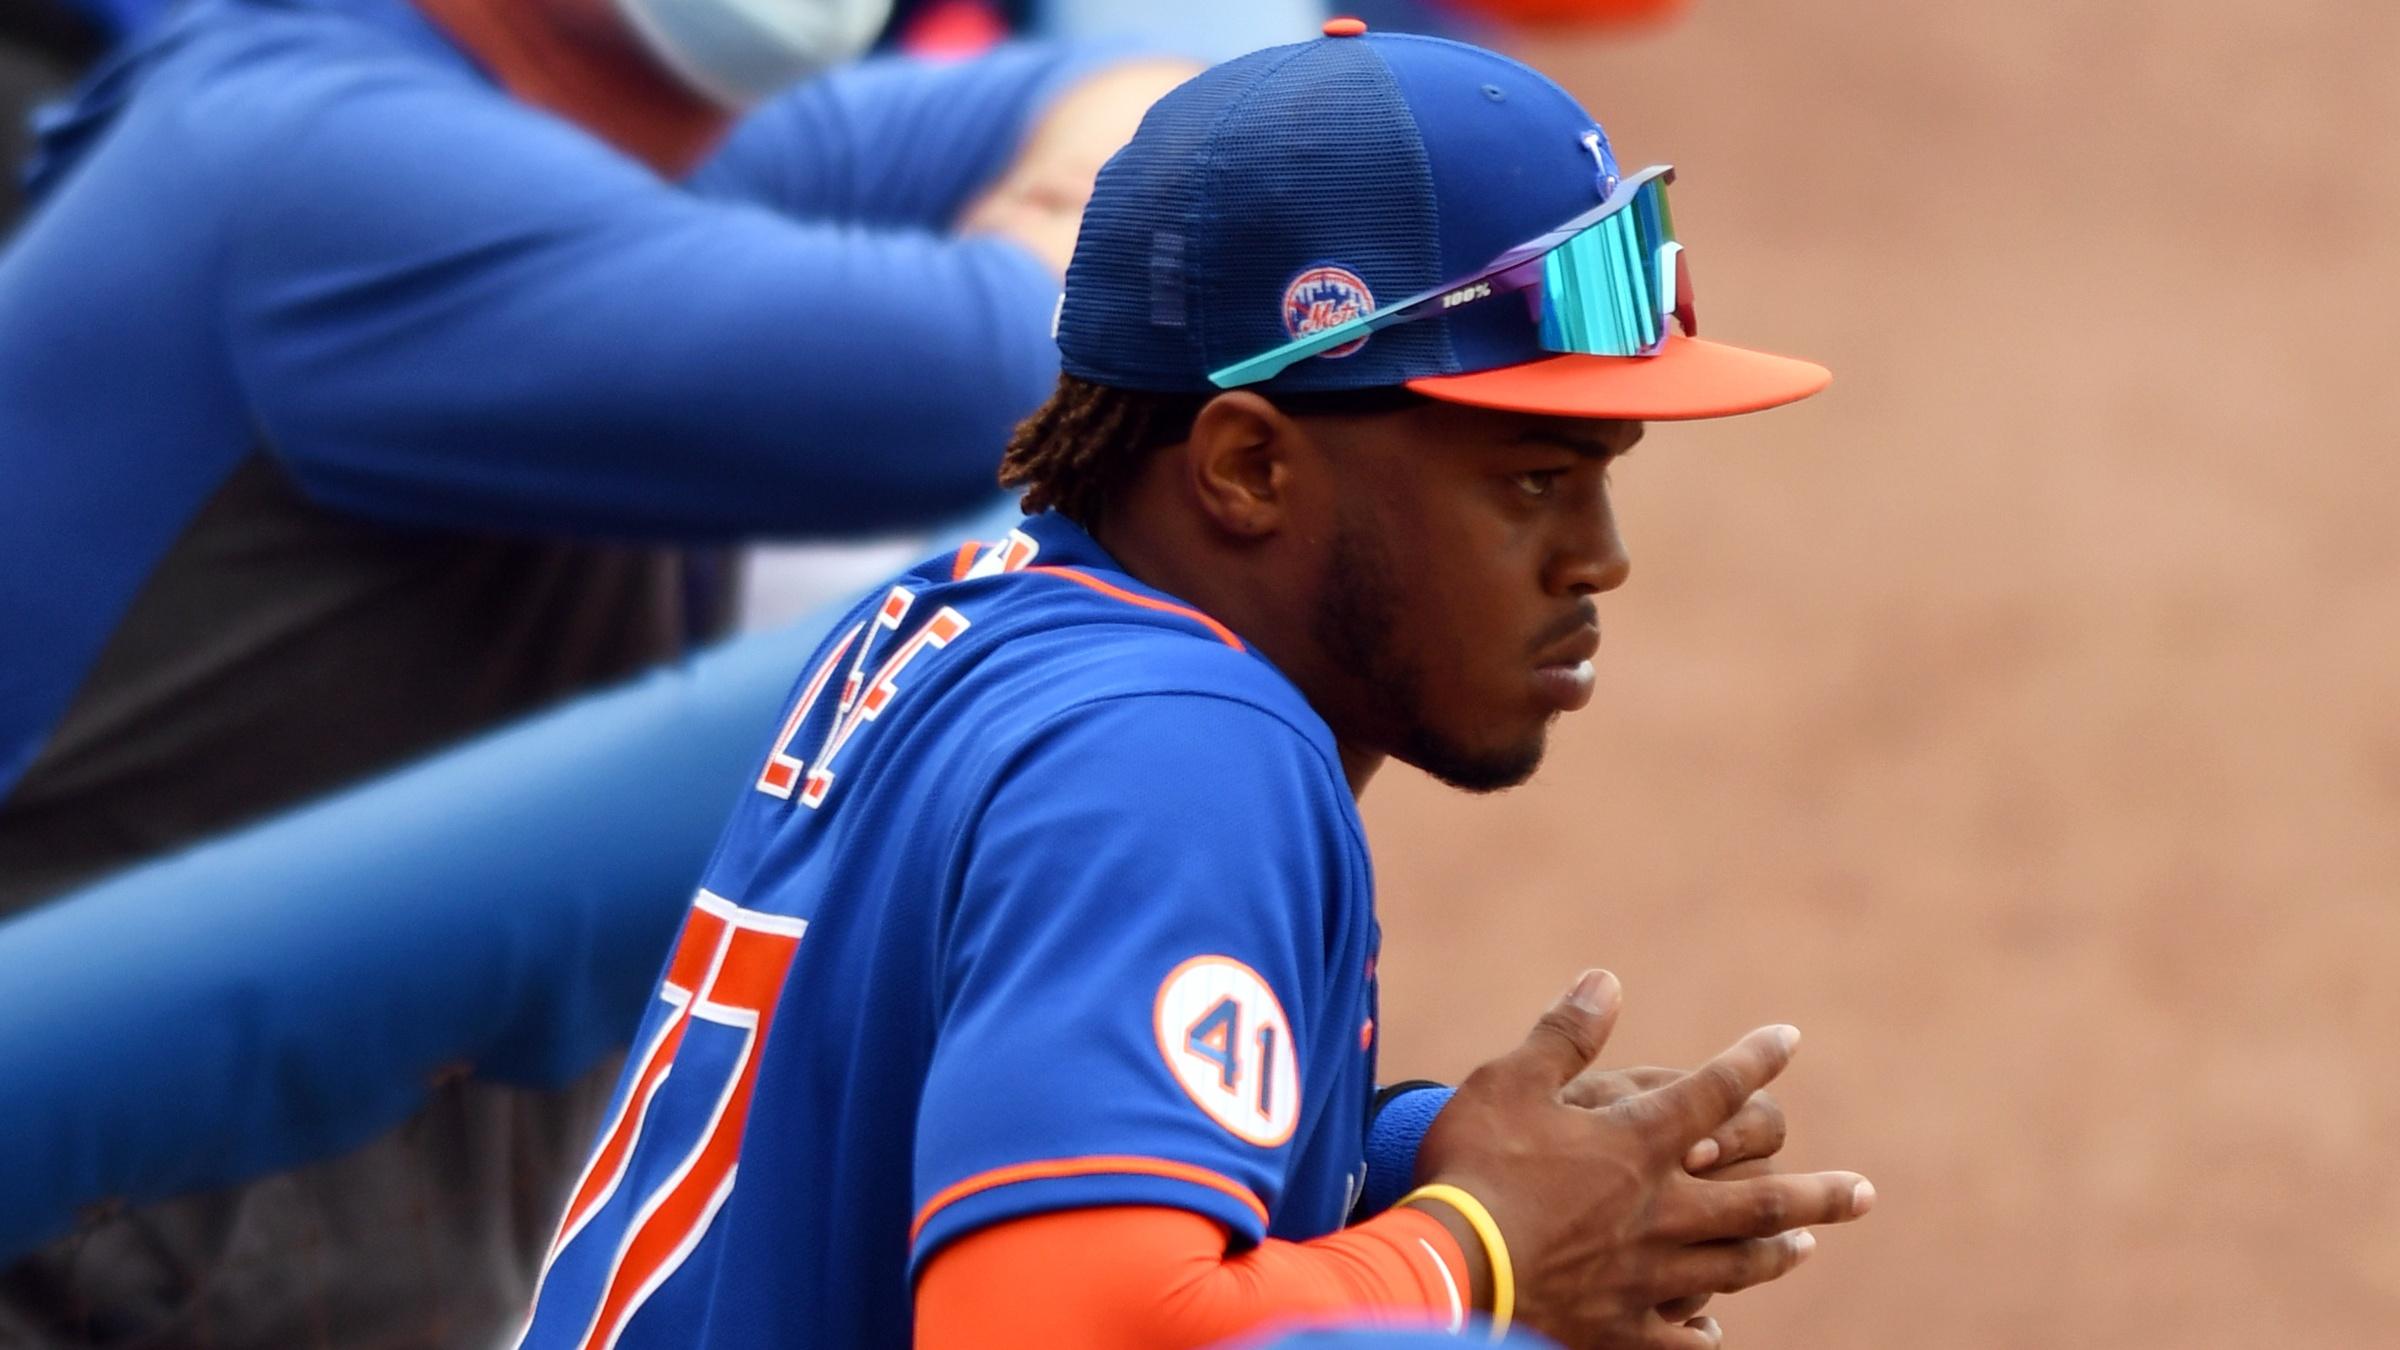 Mar 4, 2021; Port St. Lucie, Florida, USA; New York Mets center fielder Khalil Lee (77) watches game action against the Washington Nationals during a spring training game at Clover Park. / © Jim Rassol-USA TODAY Sports